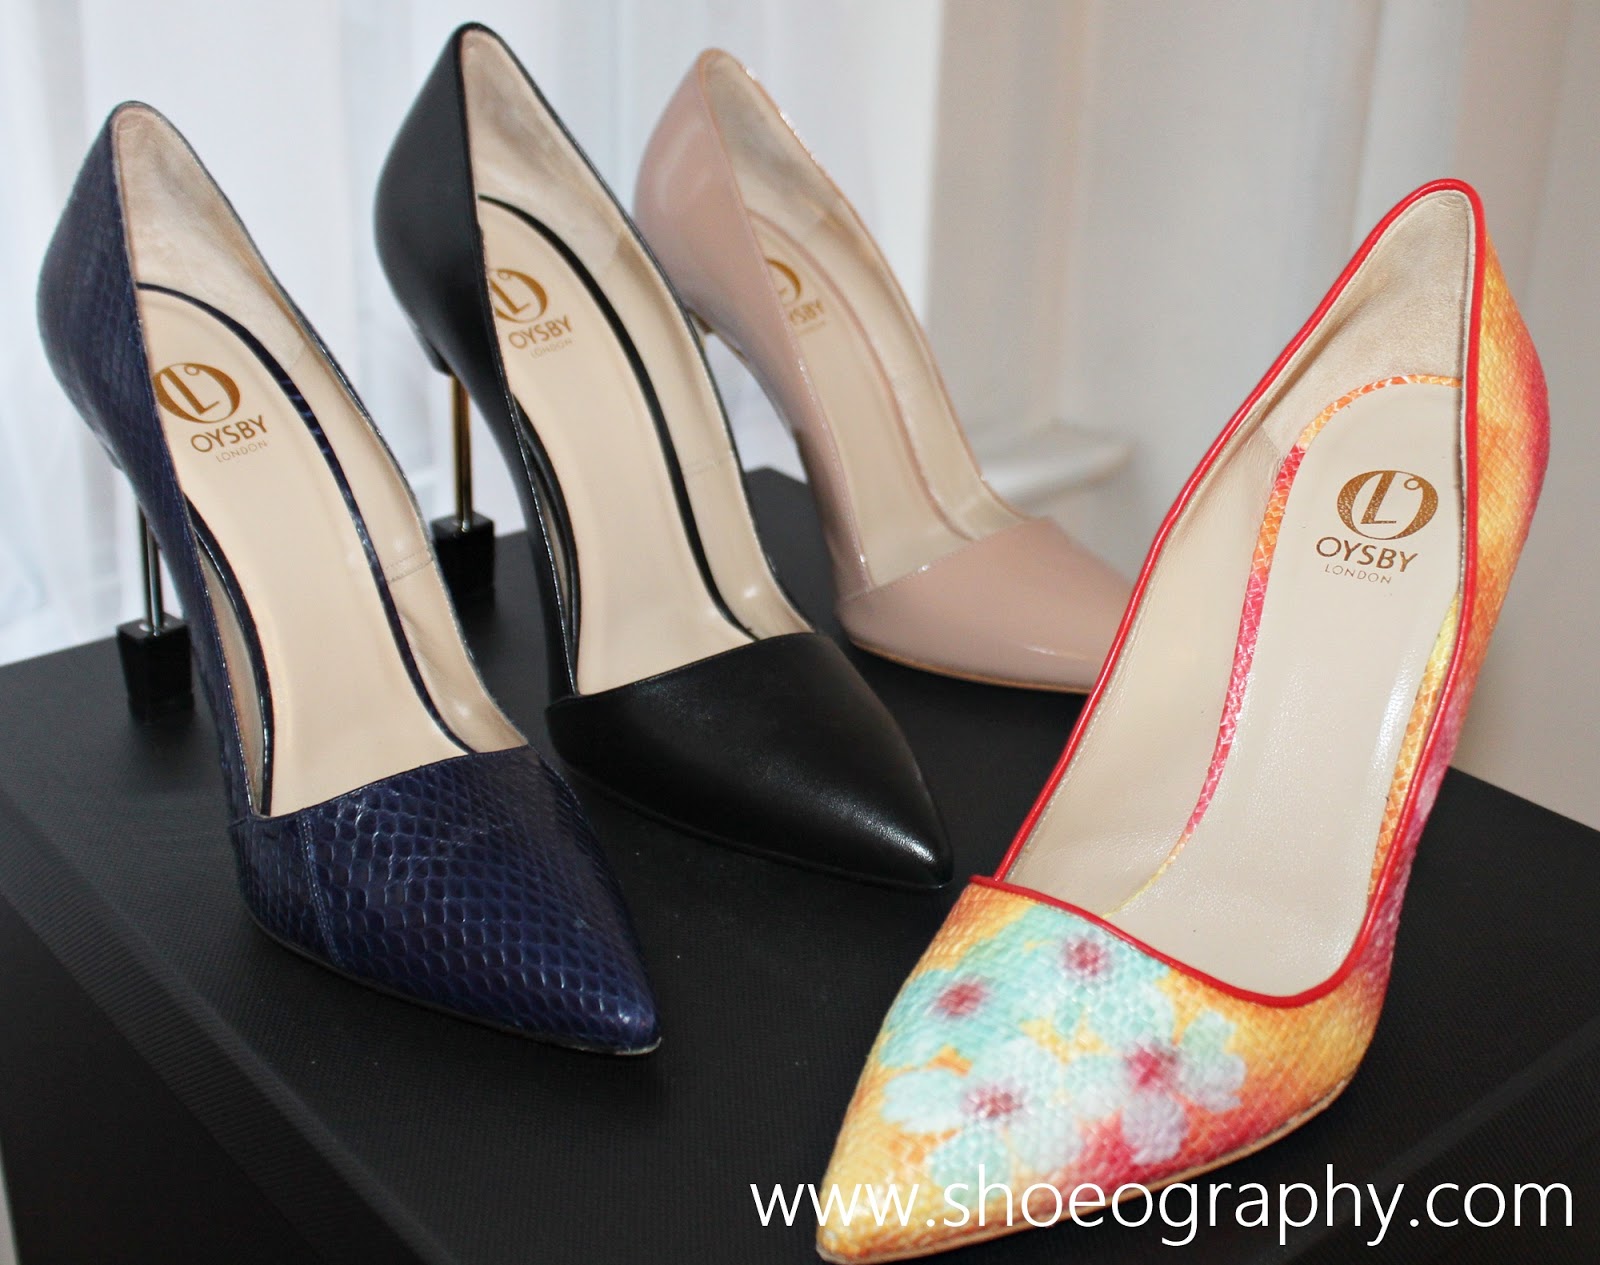 Shoe of the Day | Oysby Decolette Pumps | SHOEOGRAPHY